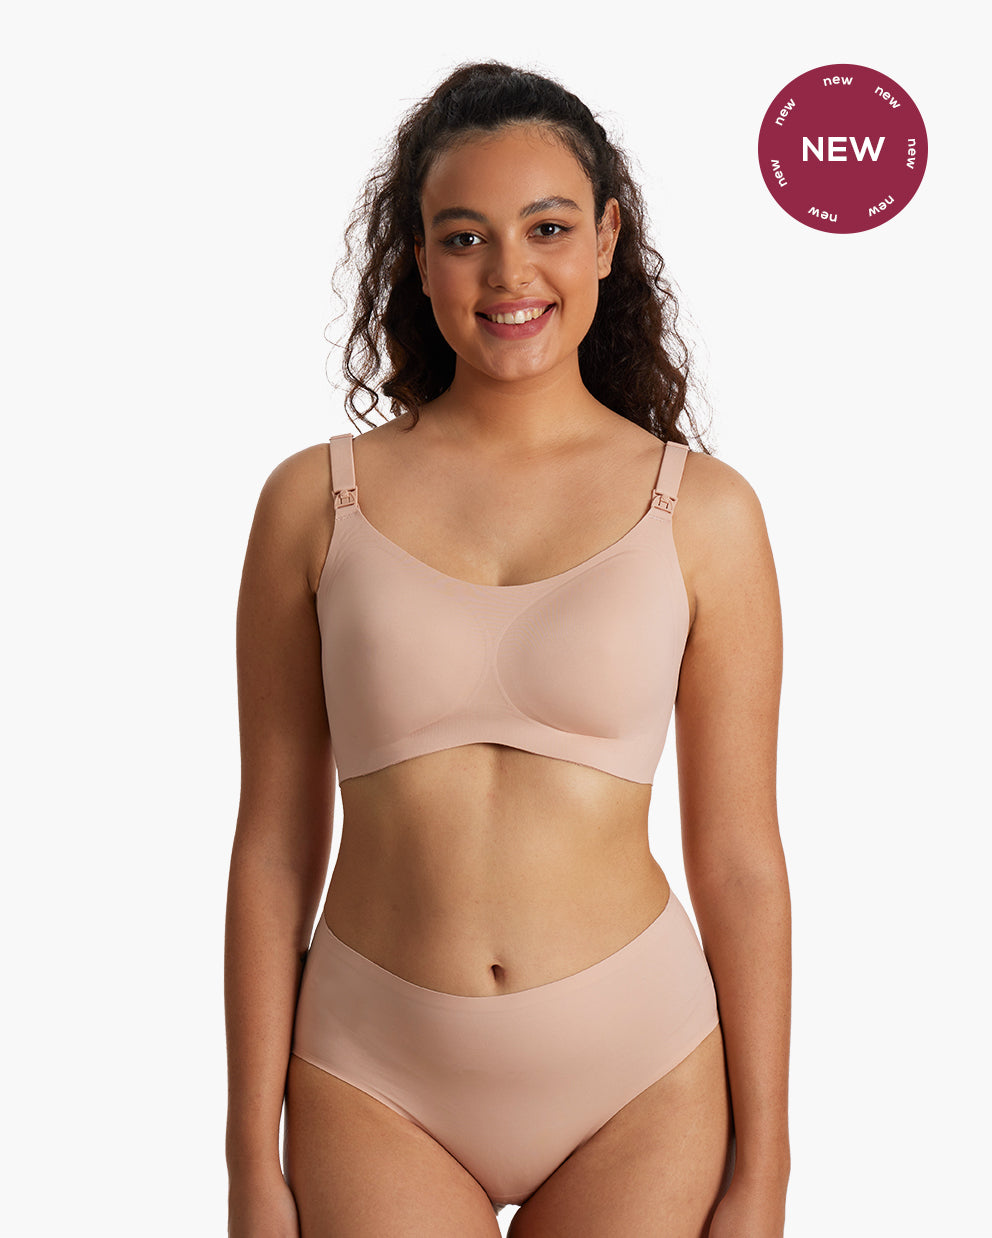 The Perfect Plus-size, Soft Pumping Bra: Introducing the Momcozy HF018